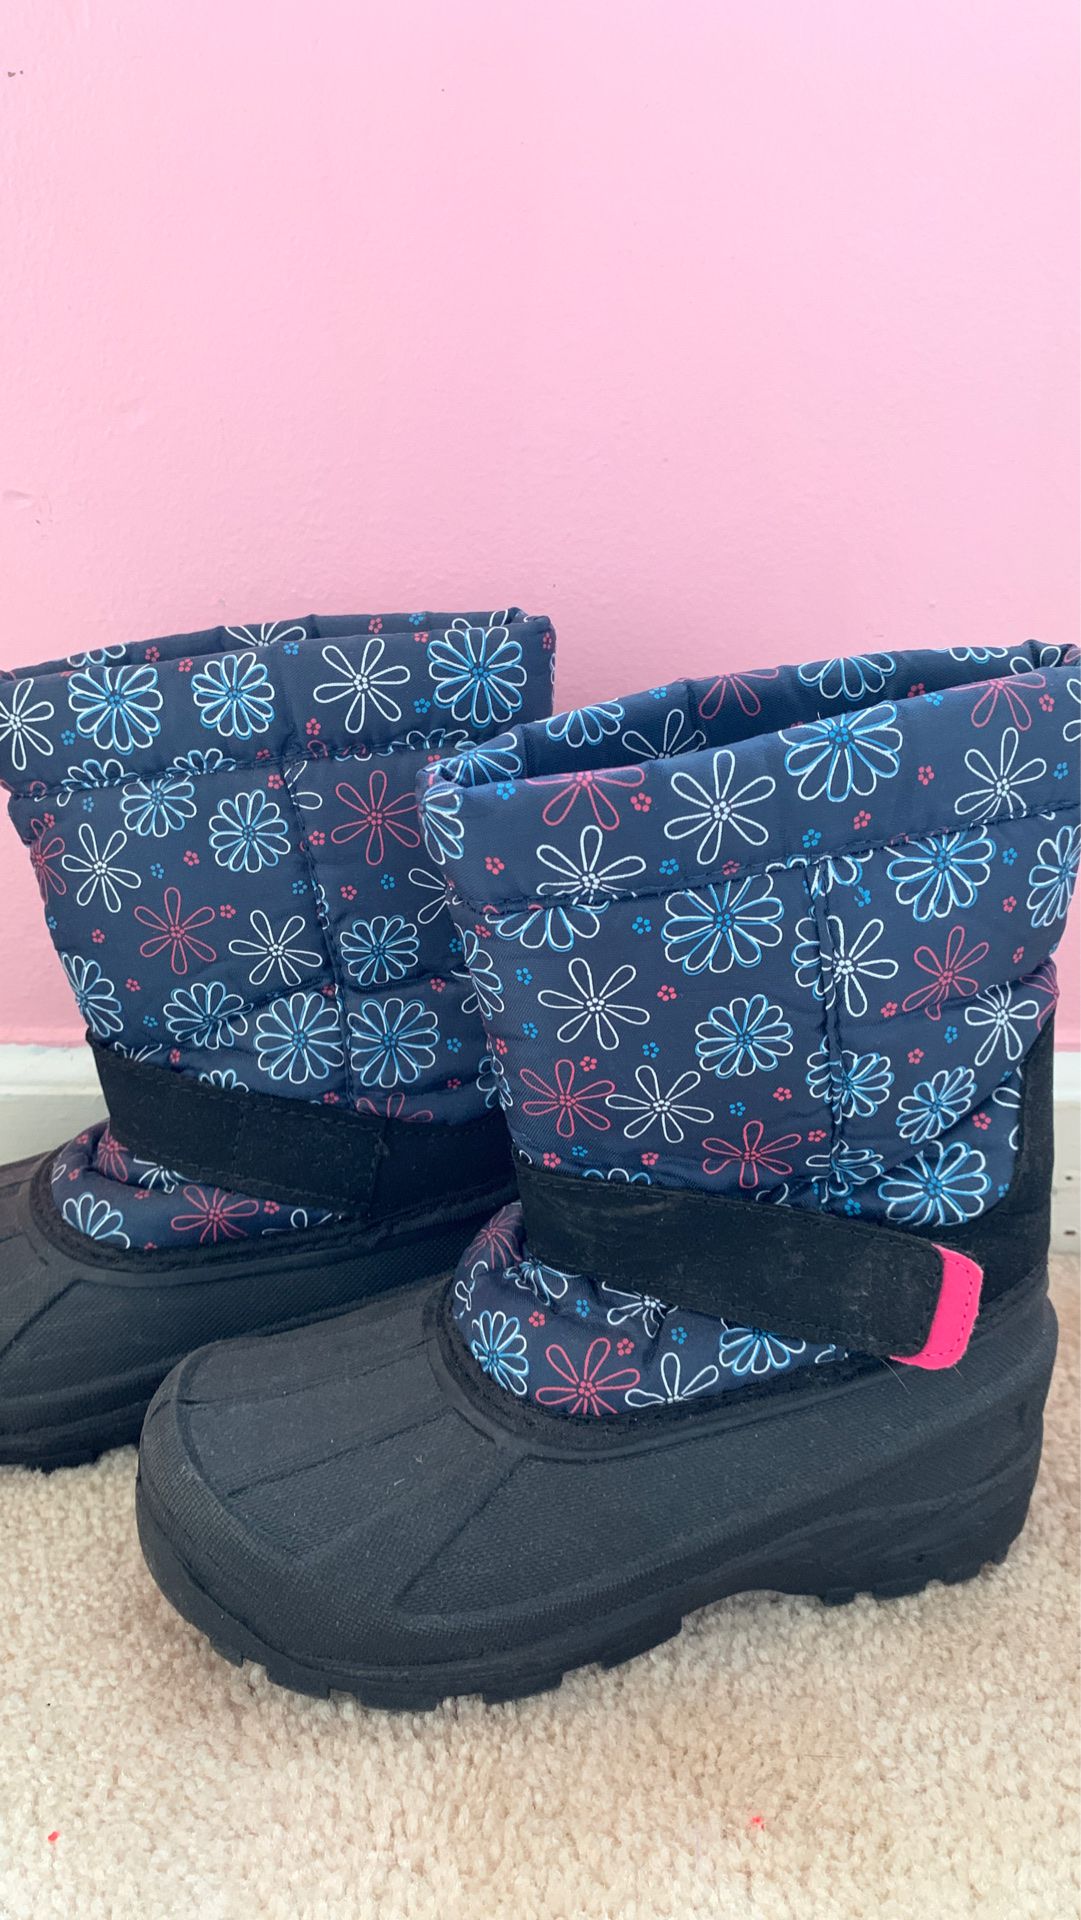 Toddler snow boots size 13